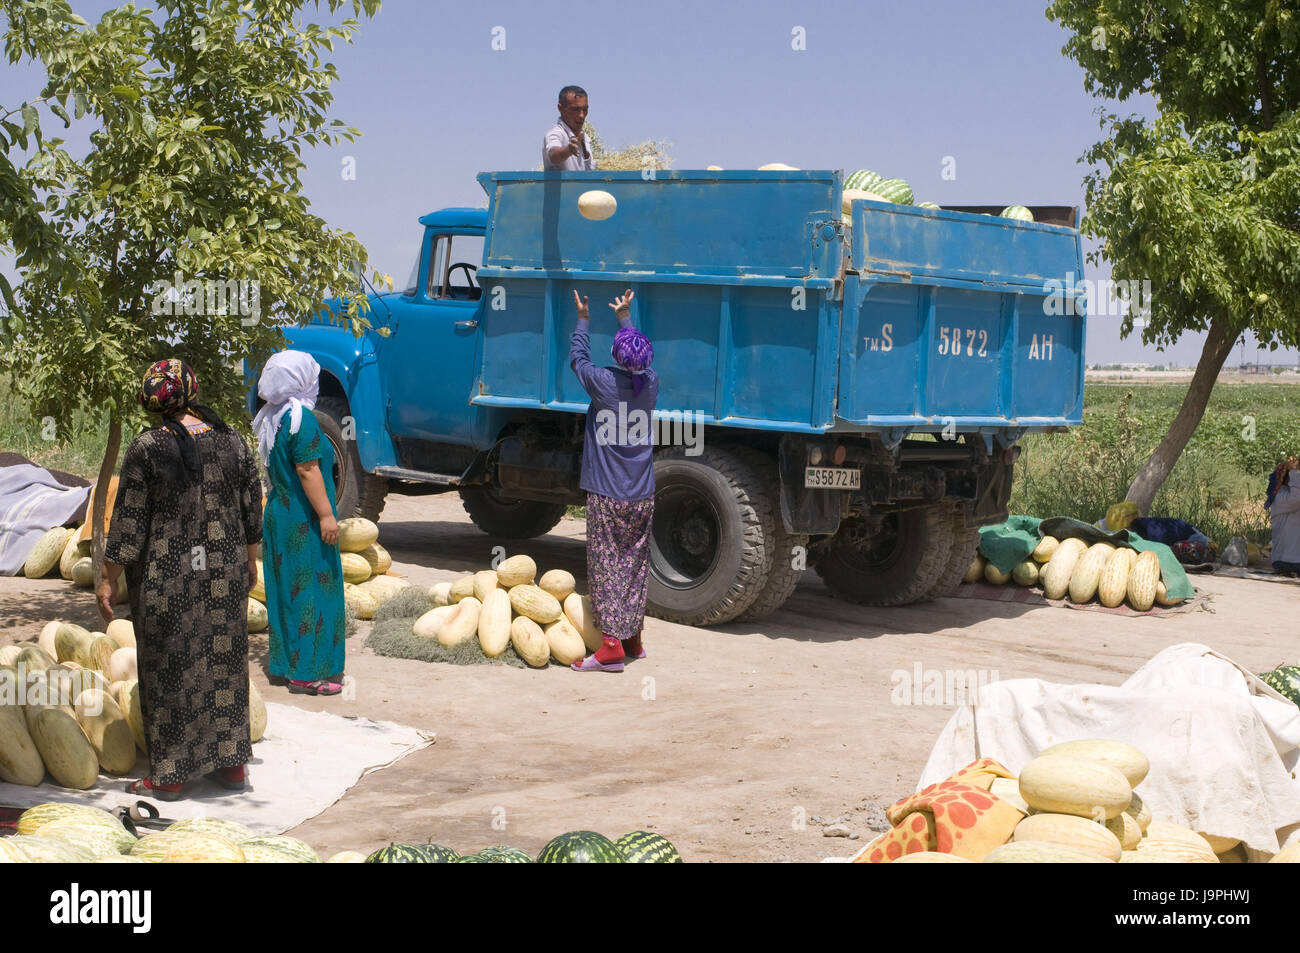 People carry melons and other fruits,Turkmenistan, Stock Photo